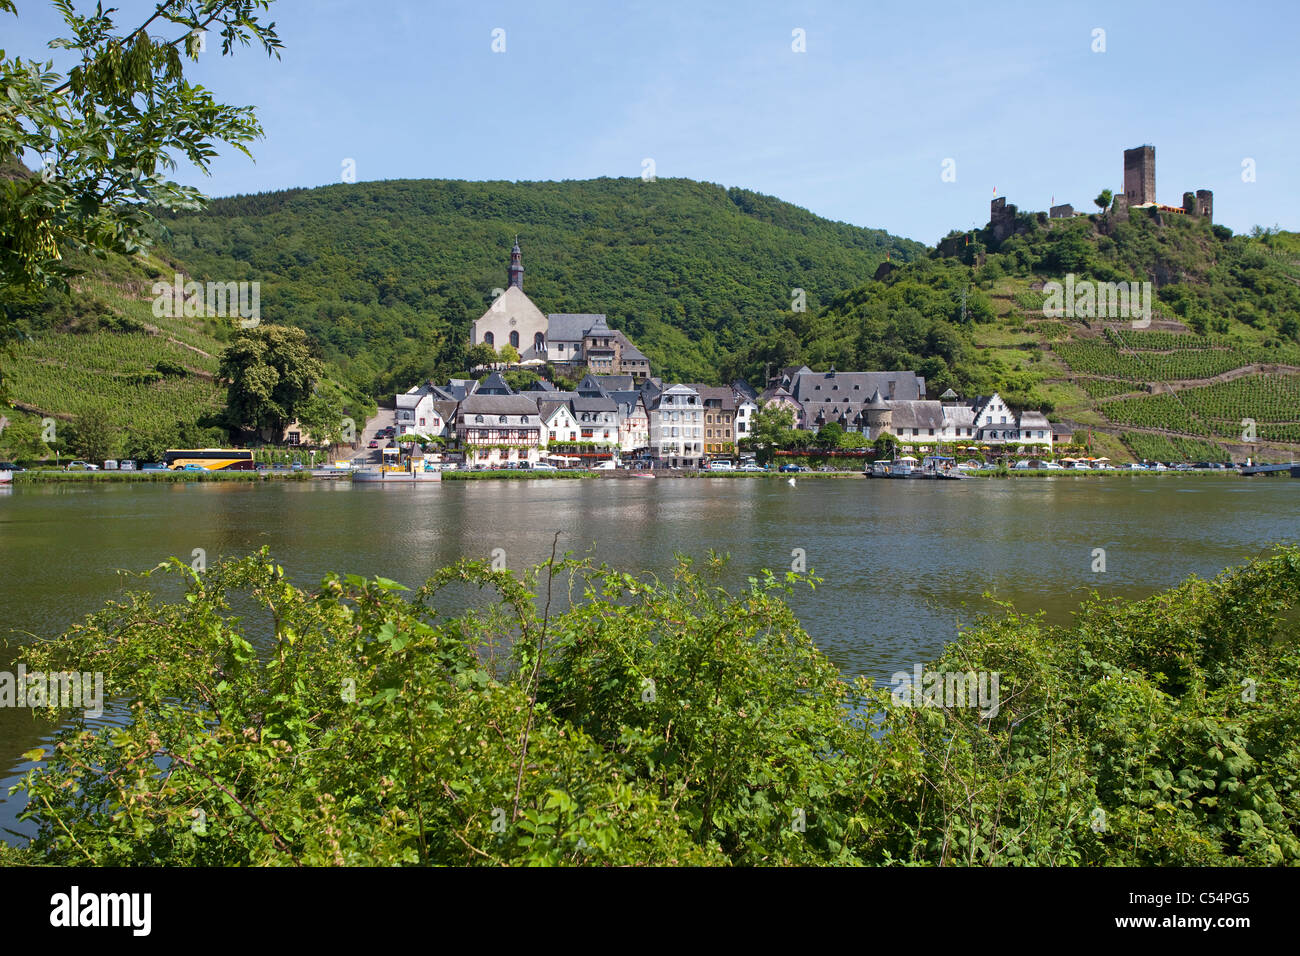 The village Beilstein, right side the fortress ruin Metternich, Mosel River, Moselle, Rhineland-Palatinate, Germany, Europe Stock Photo